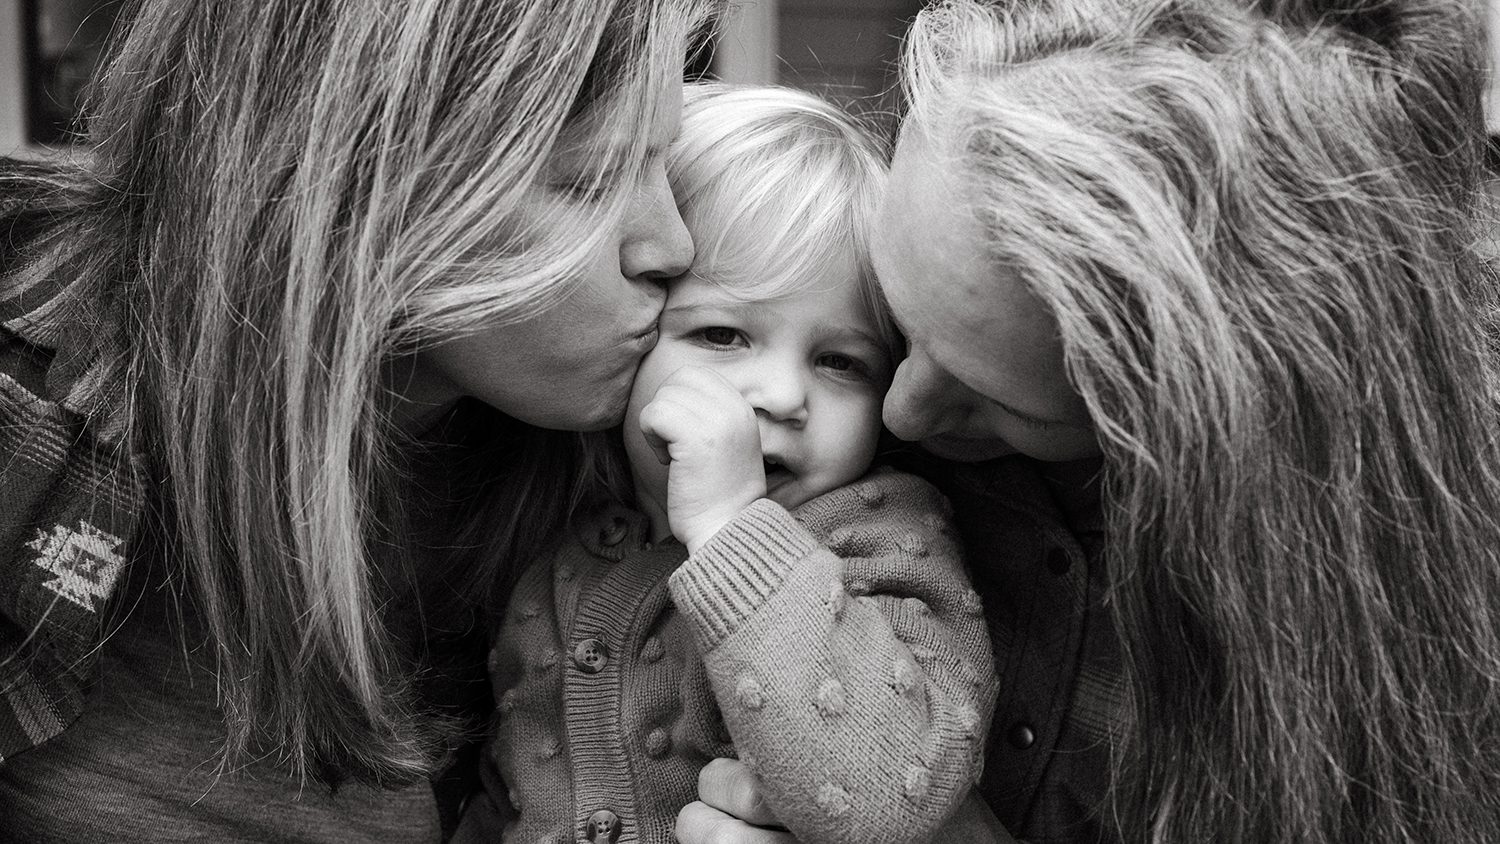 Portland family photographer captures black and white close up image of two moms kissing the cheeks of their toddler daughter who is looking into the camera with her thumb in her mouth.